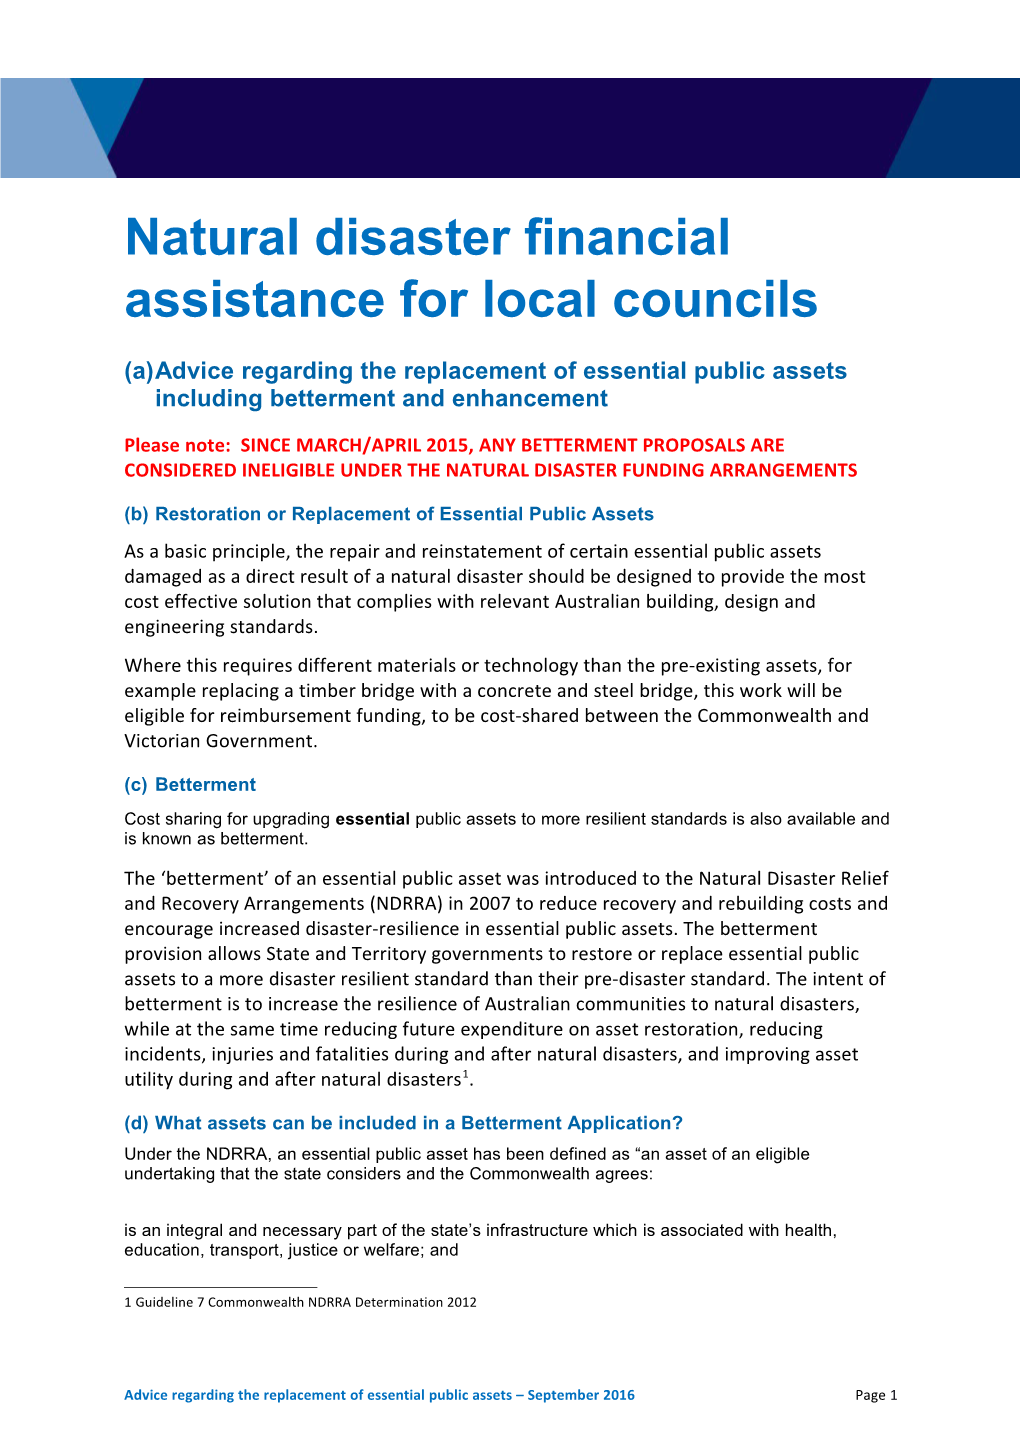 Natural Disaster Financial Assistance for Local Councils